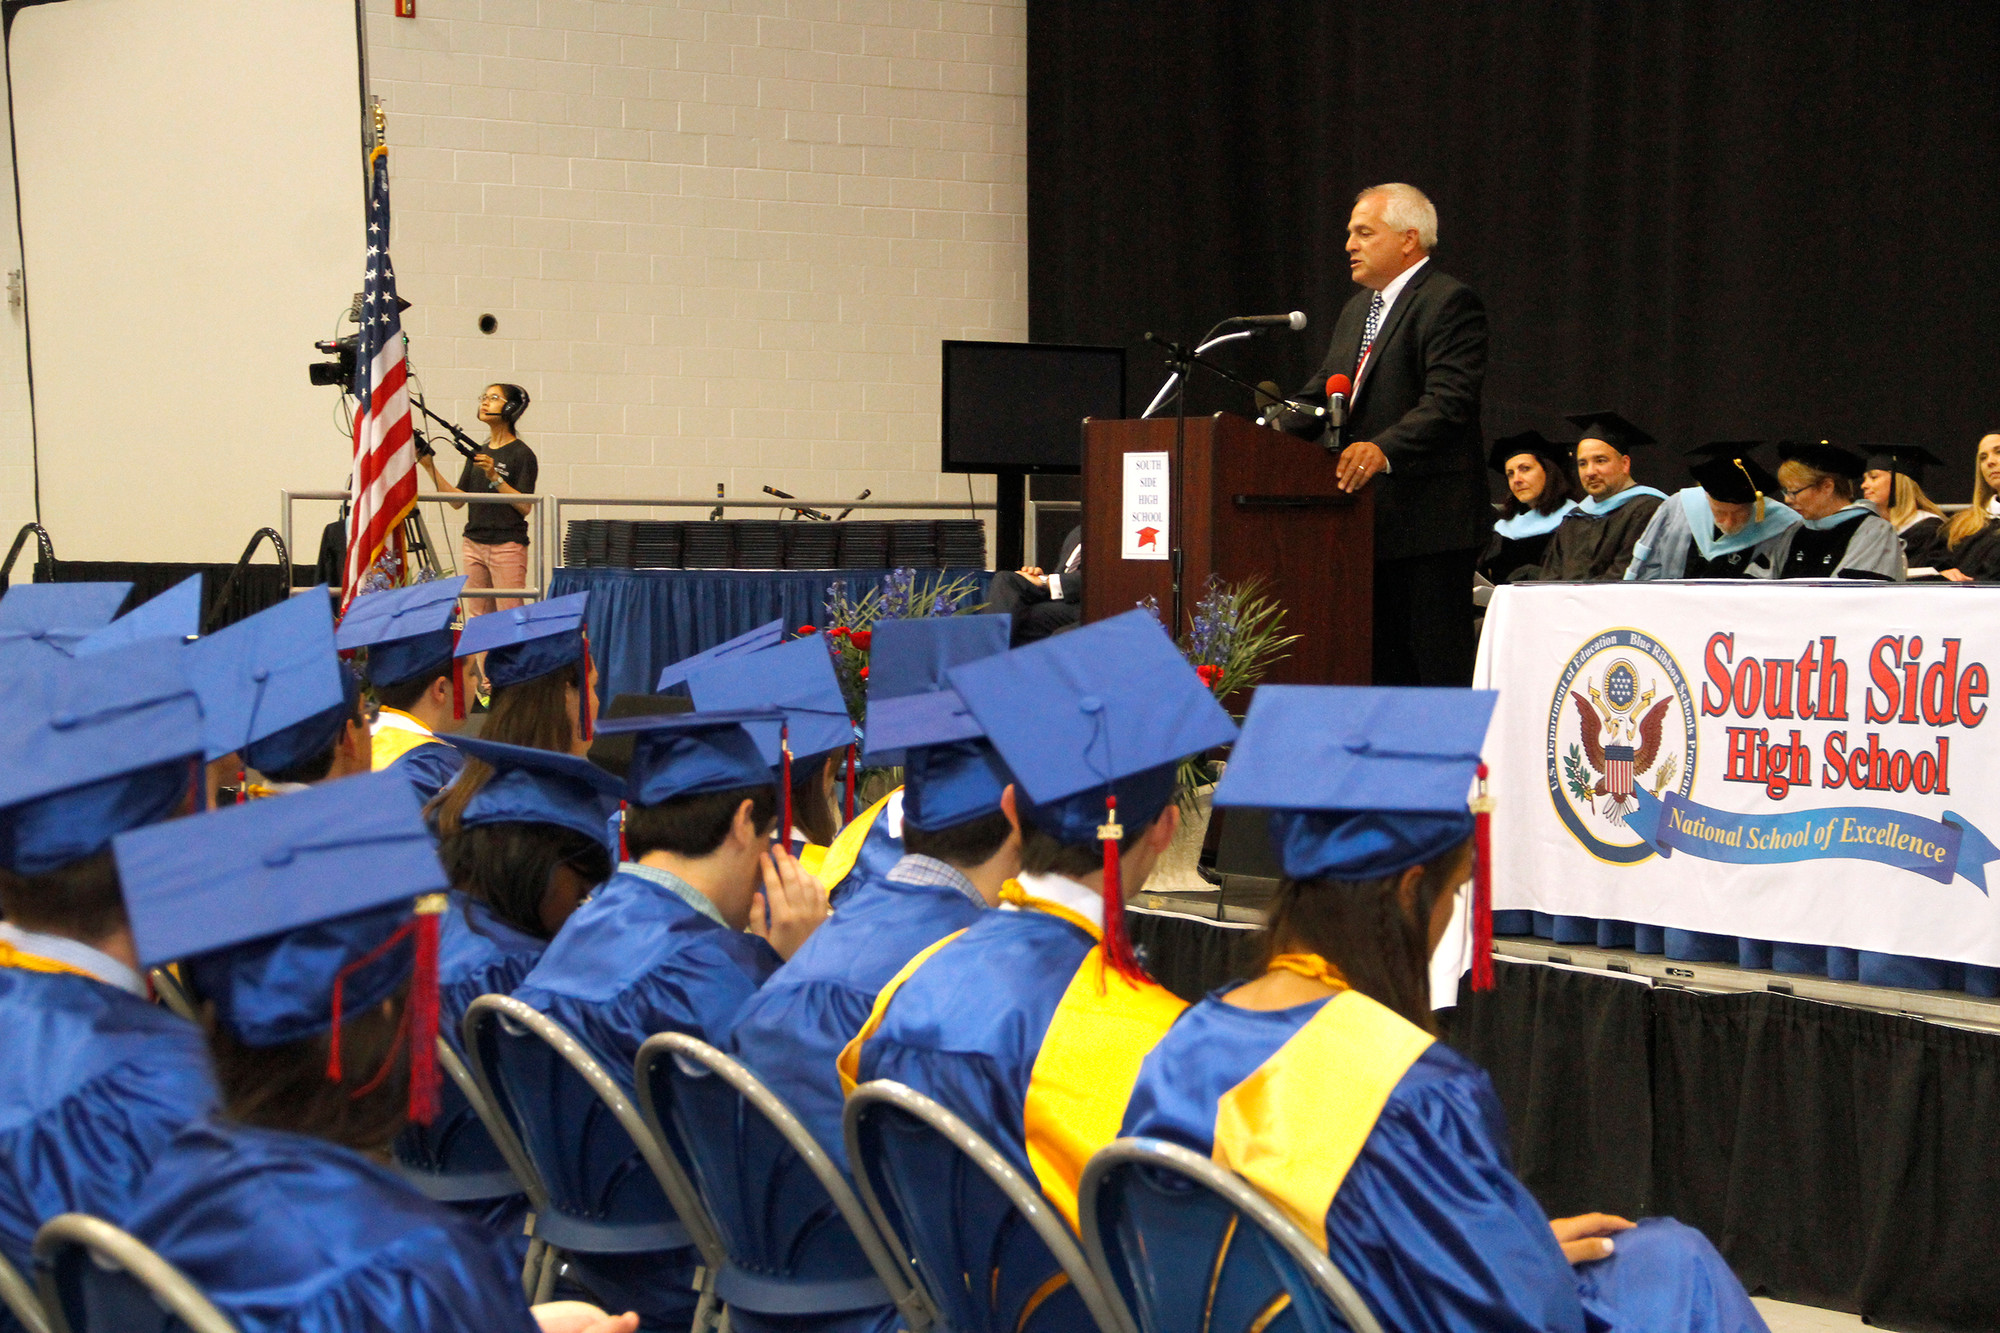 Board of Education Trustee John O’Shea told students to make sure they did what they loved.